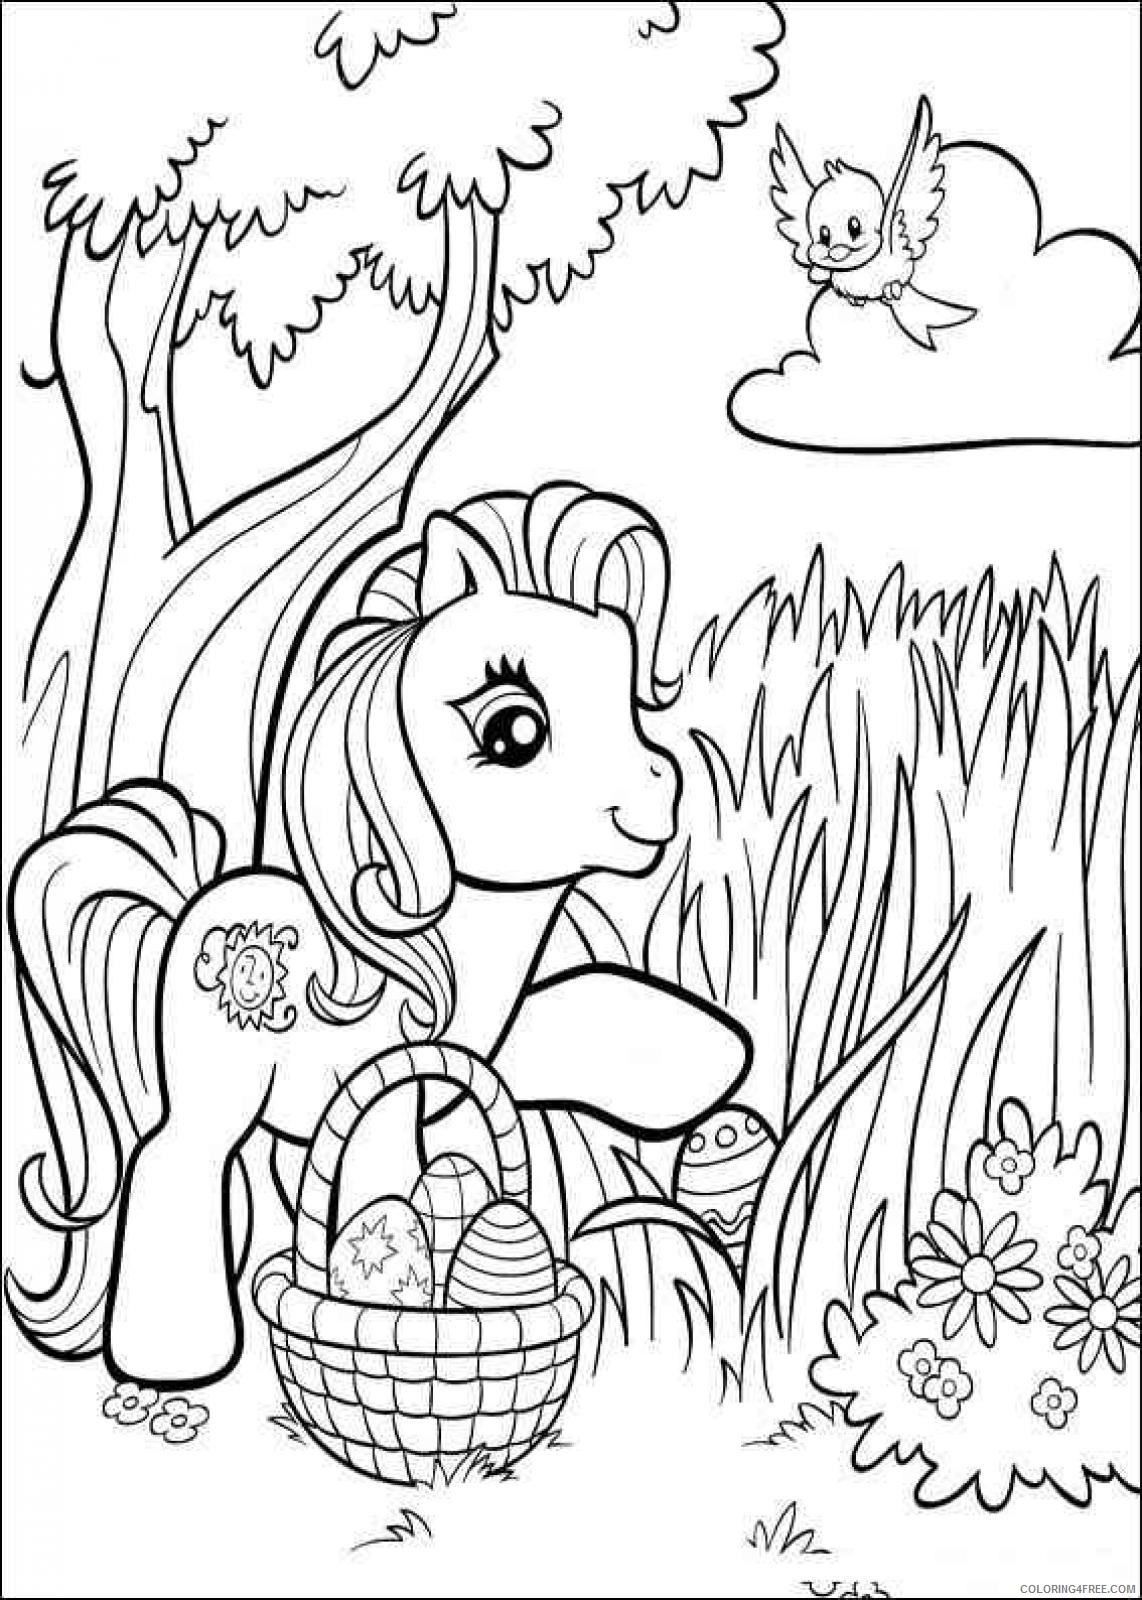 My Little Pony Coloring Pages Cartoons My Little Pony Sheets to Print Printable 2020 4524 Coloring4free